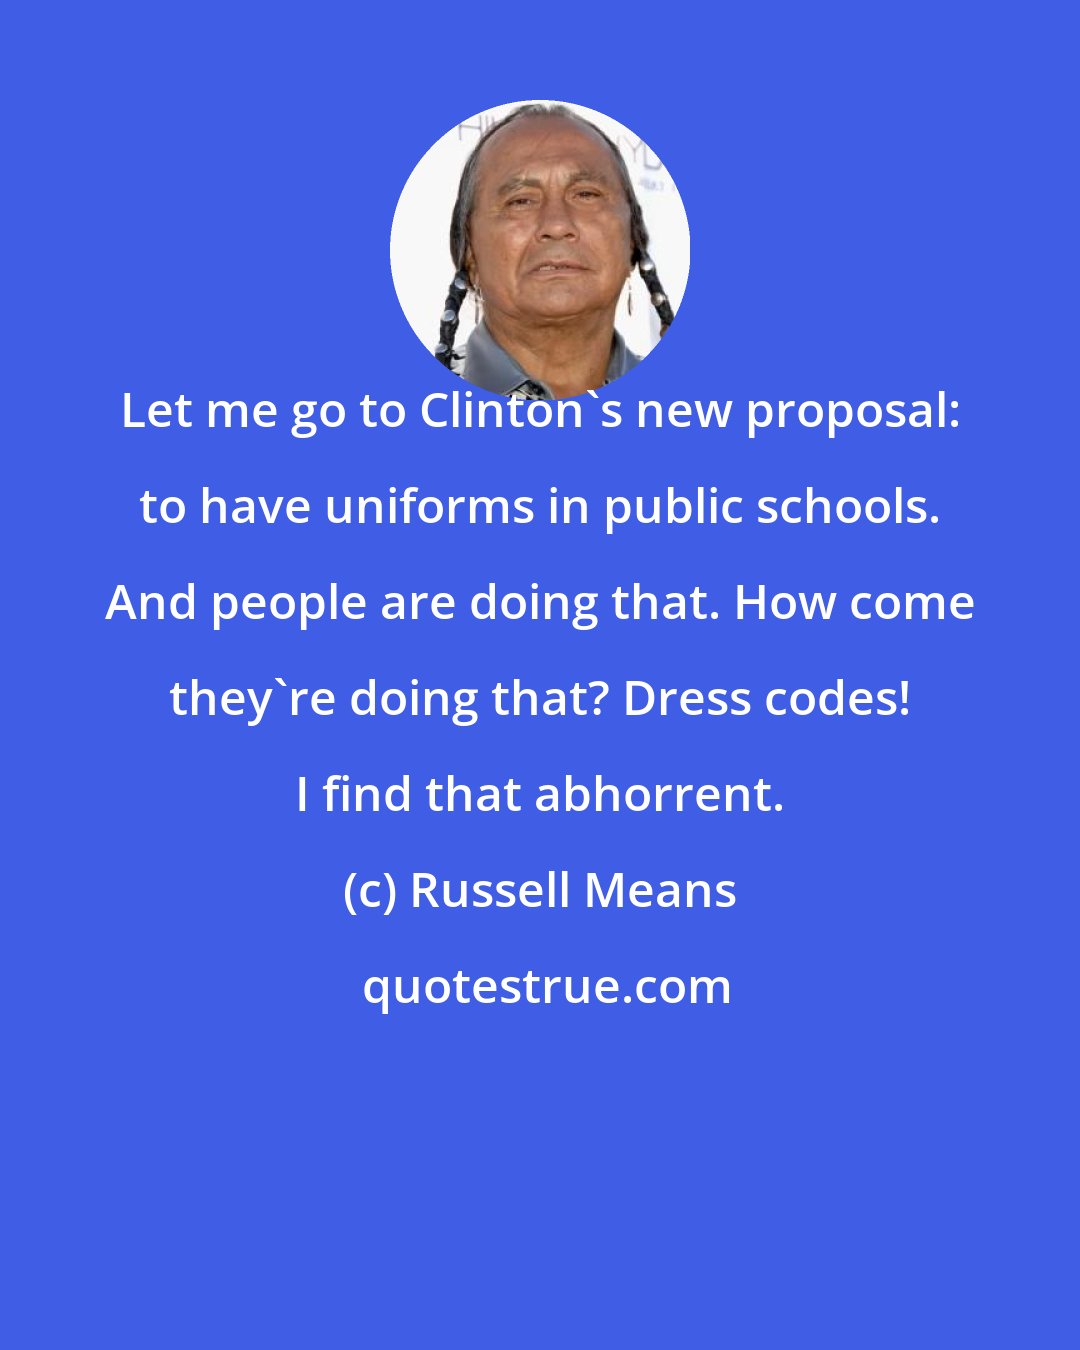 Russell Means: Let me go to Clinton's new proposal: to have uniforms in public schools. And people are doing that. How come they're doing that? Dress codes! I find that abhorrent.